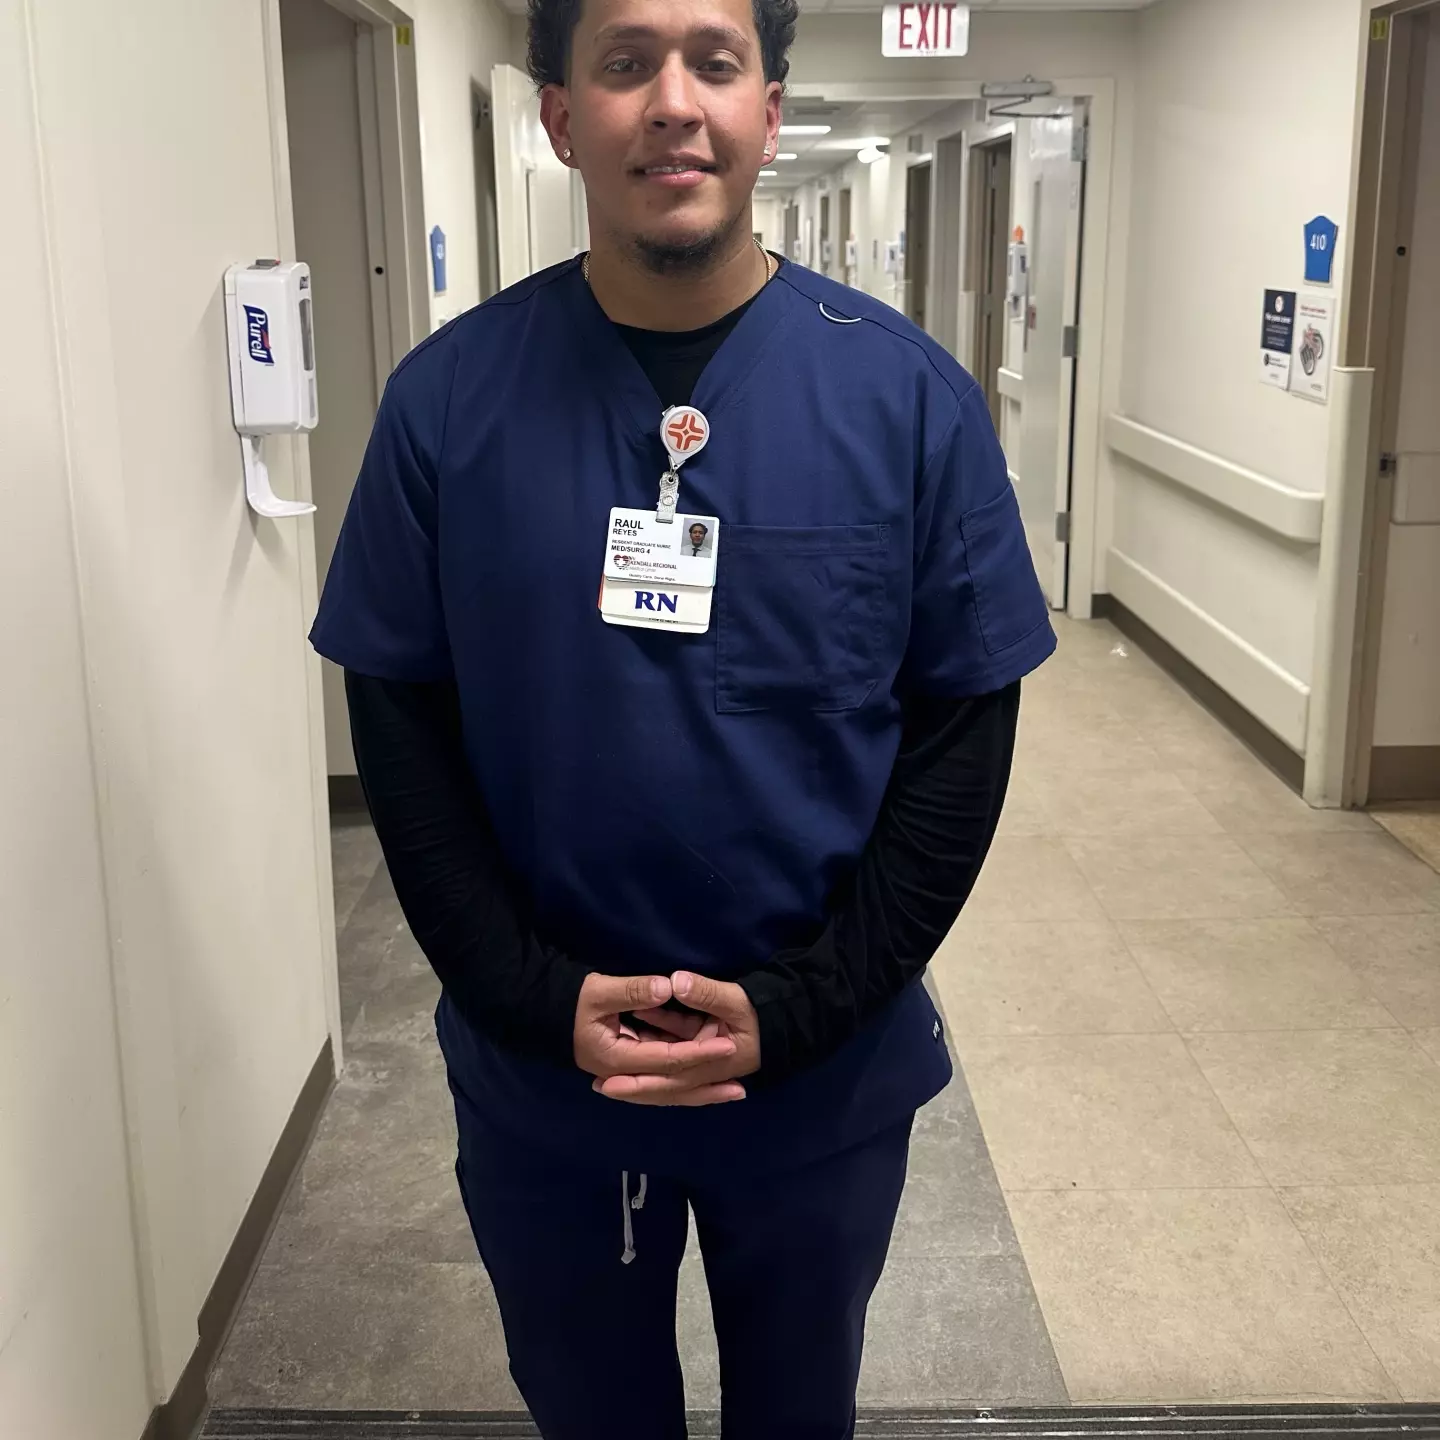 Raul Reyes in scrubs at the hospital.